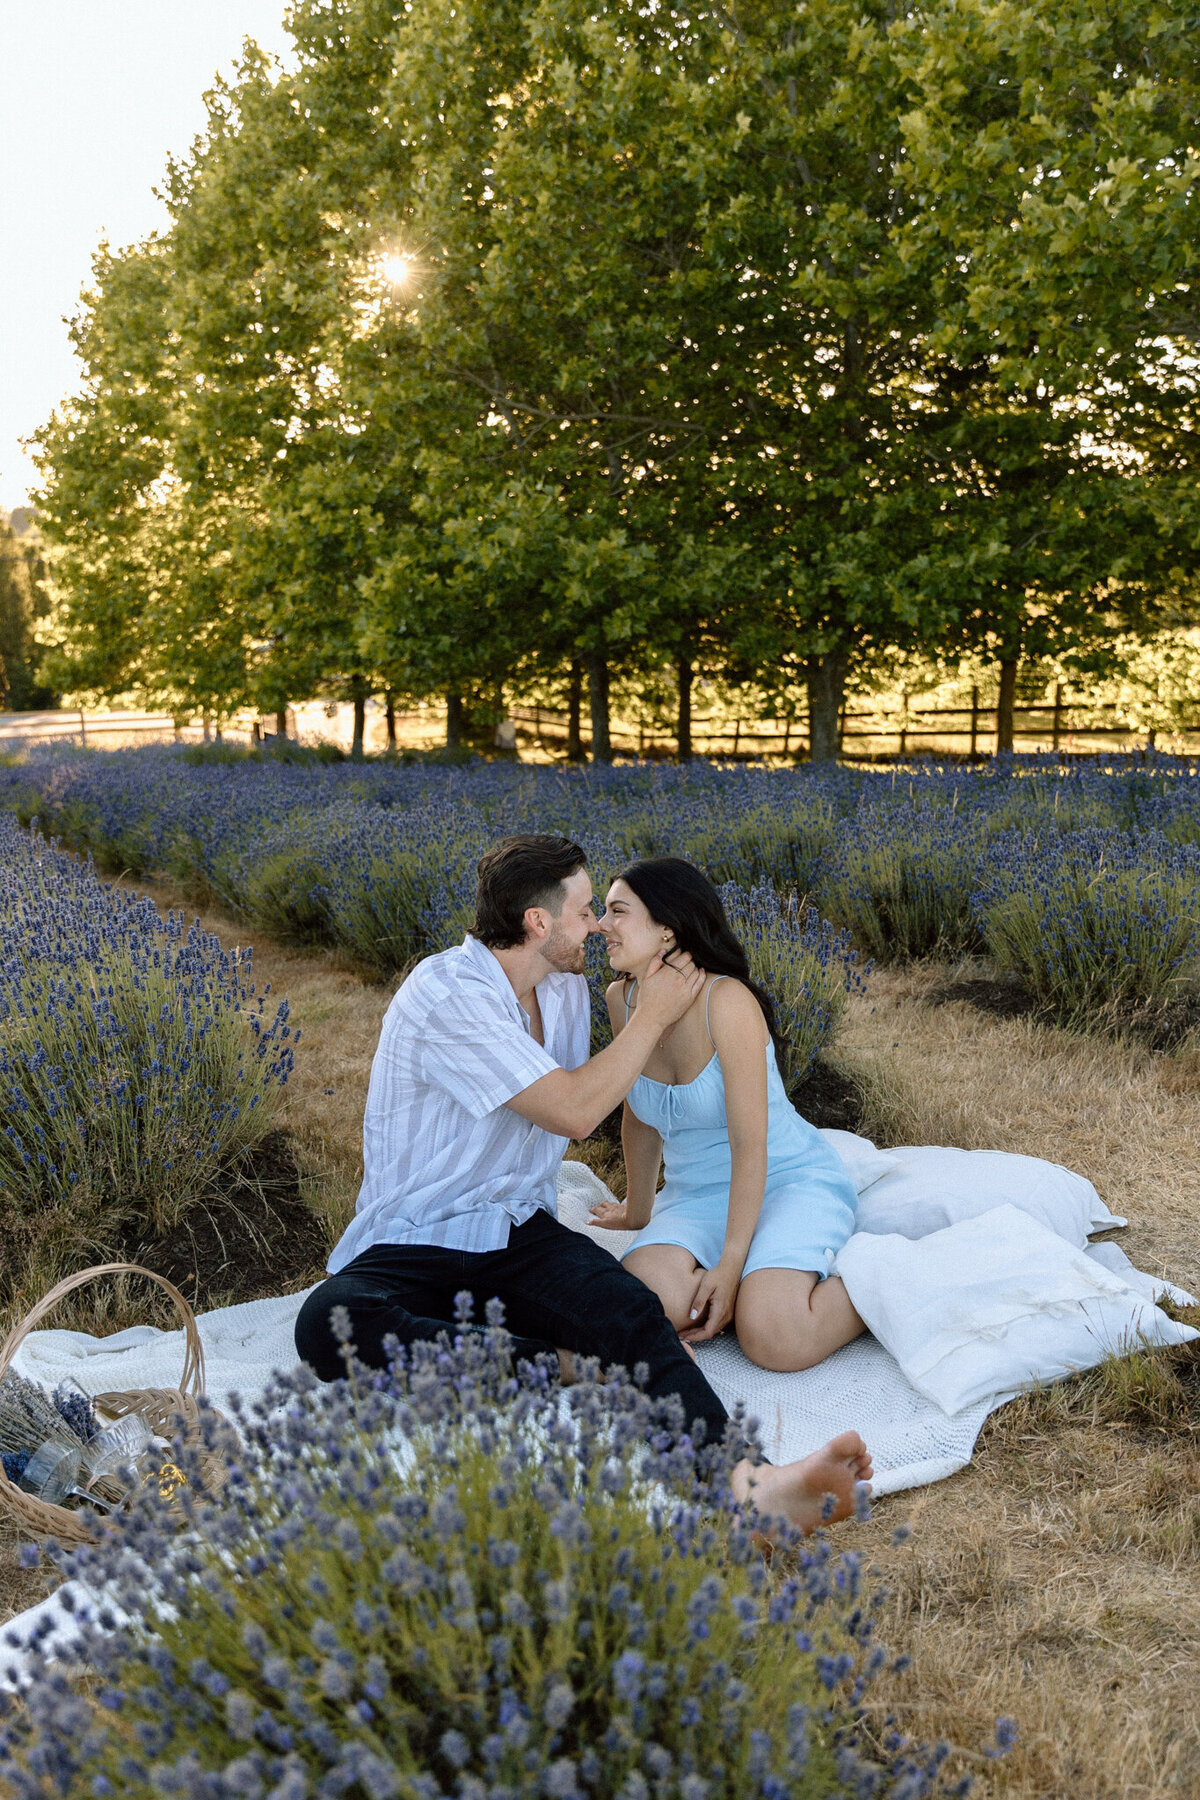 Gorgeous engagement portrait in a field of purple wildflowers, captured by Bronte Taylor Photography, a Vancouver-based photographer with a playful, genuine and intimate approach.